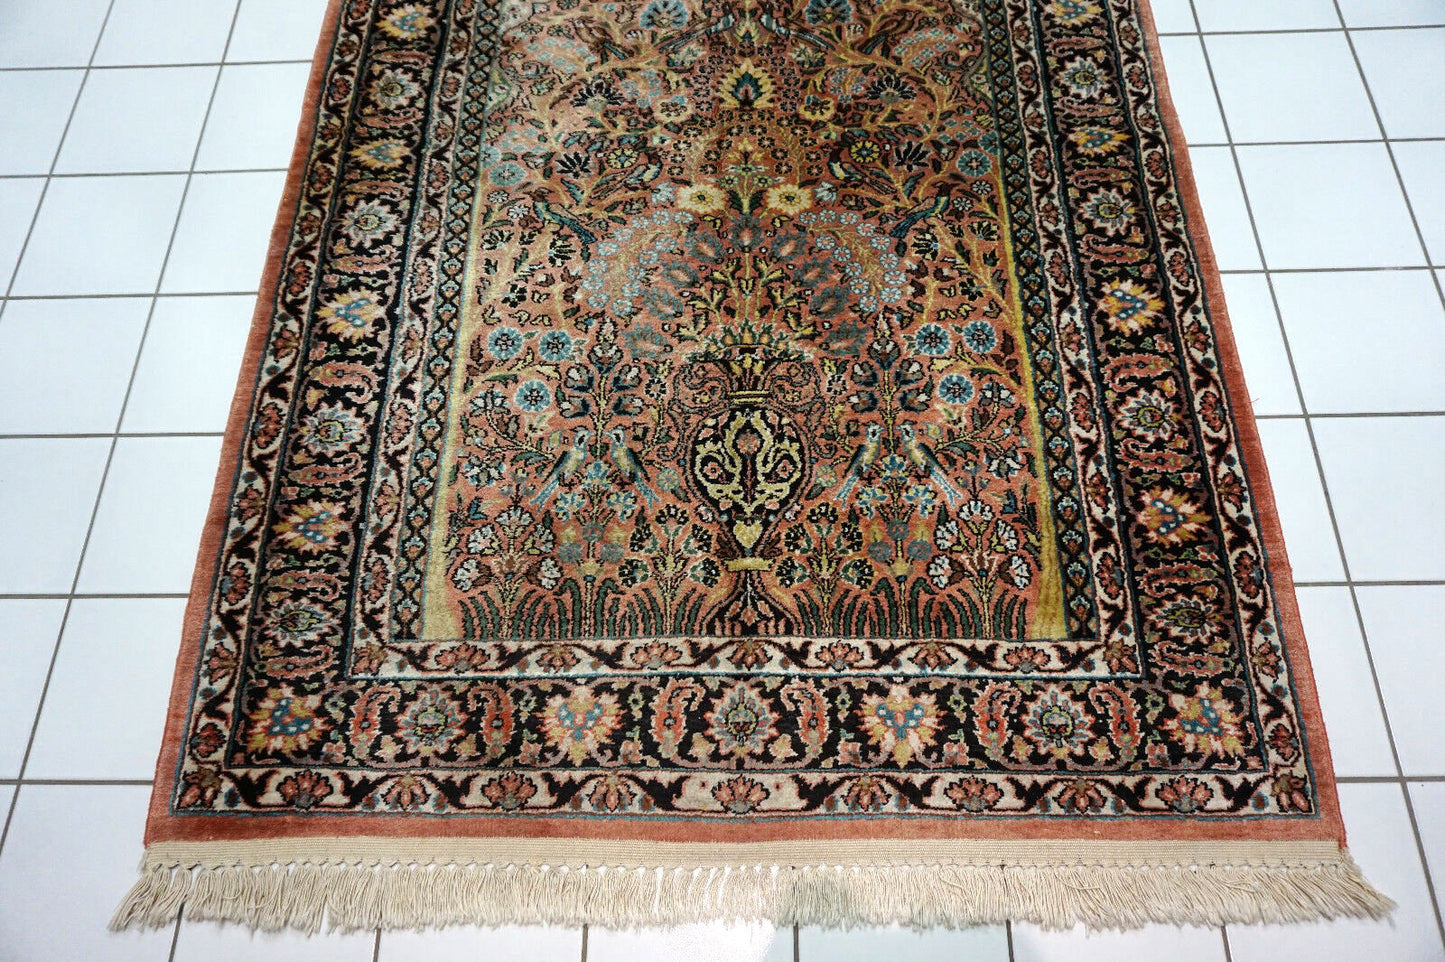 Authentic Handwoven Kashmiri Rug with Collectible Value